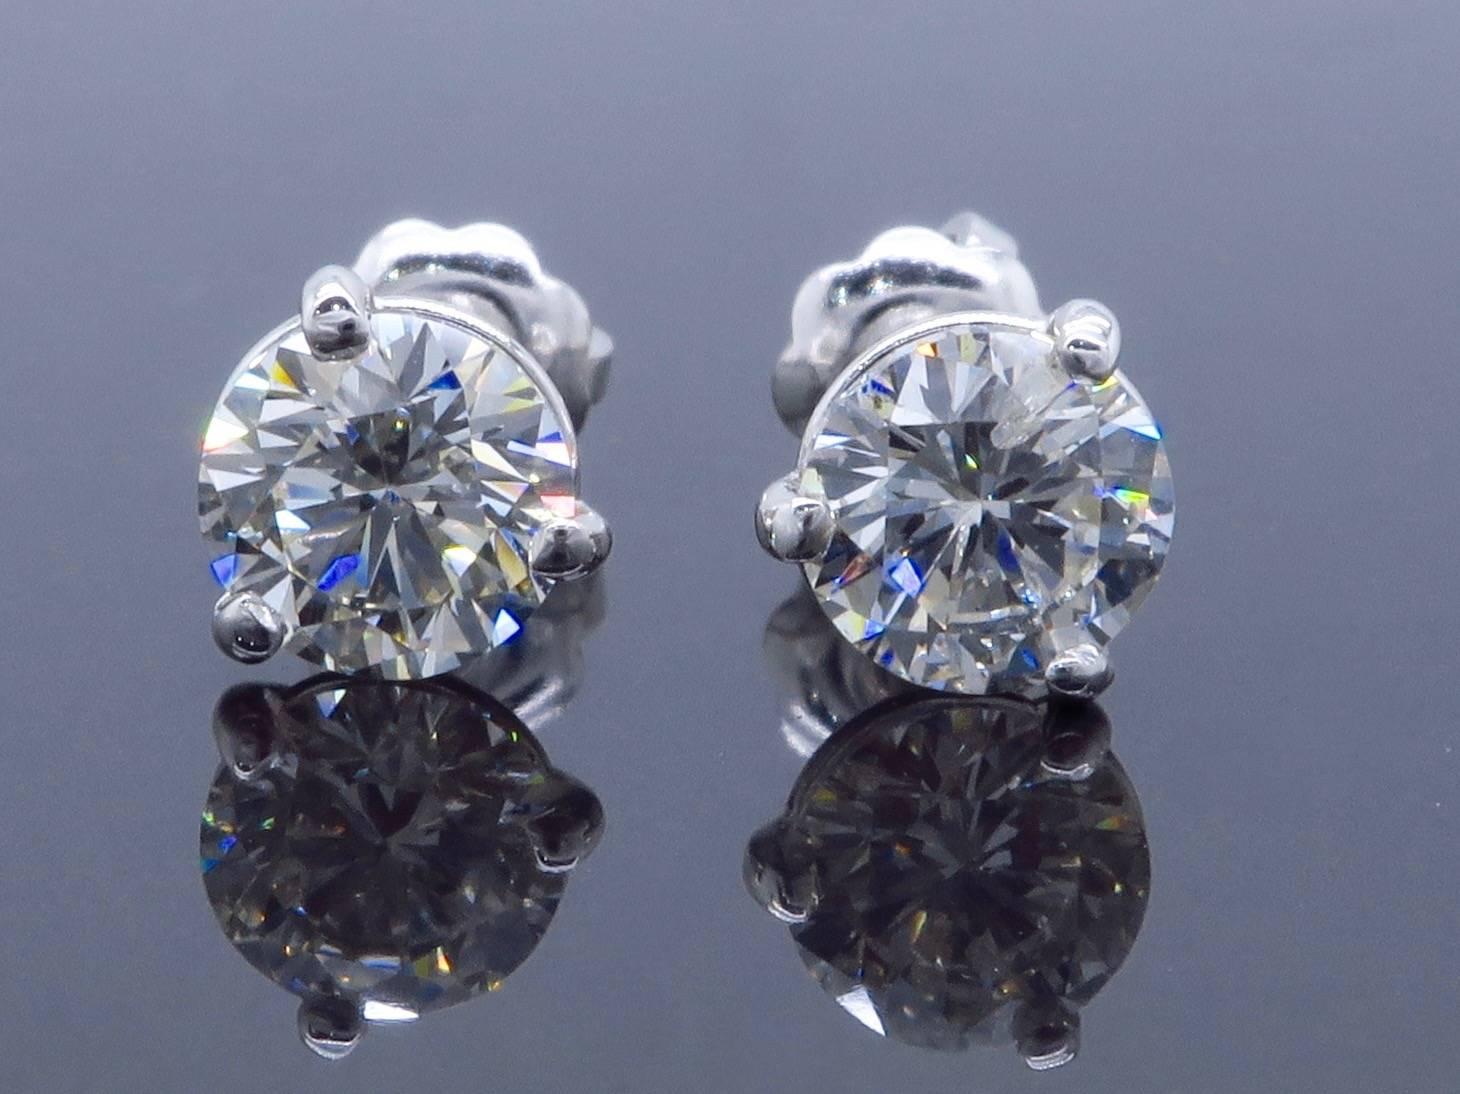 Classic pair of Martini style studs features a .54CT and .53CT Round Brilliant Cut Diamond. The diamonds display I-J color and SI-I clarity. There is approximately 1.07CTW of diamonds in this beautiful pair. The 14K white gold earrings weigh 1.00